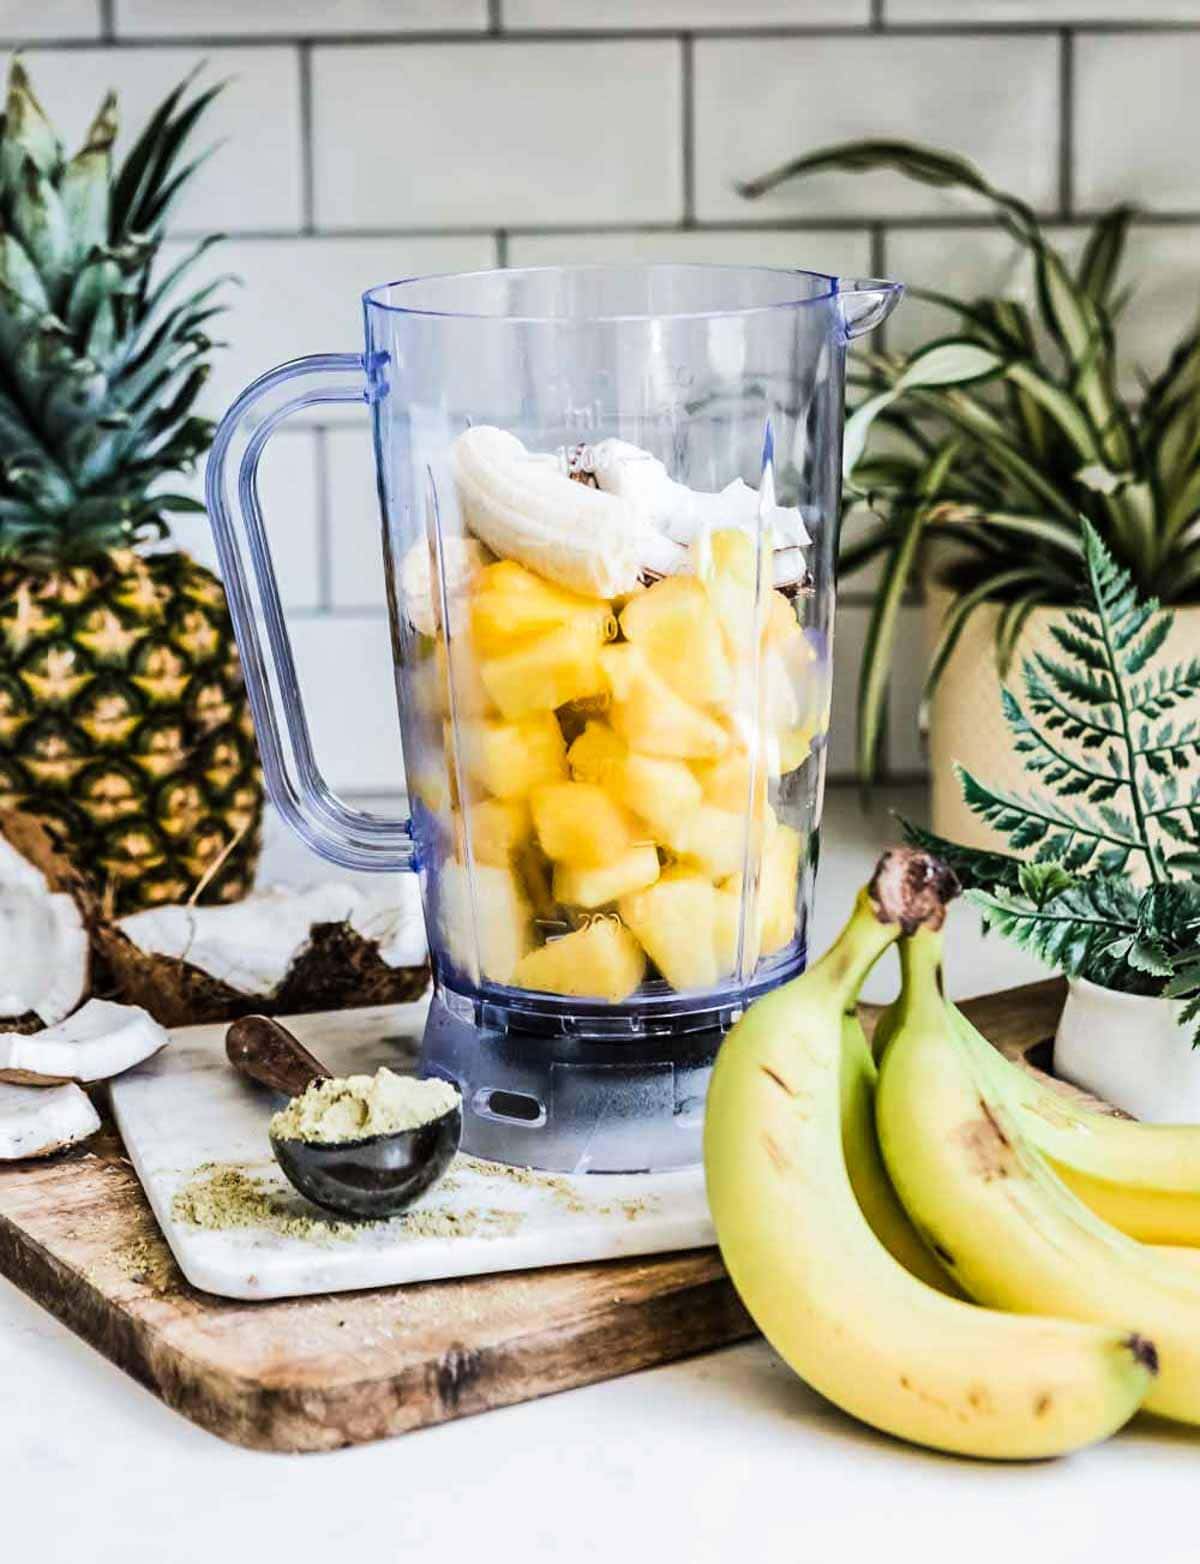 Dole Whip Weight Gain Smoothie Recipe with banana and pineapple